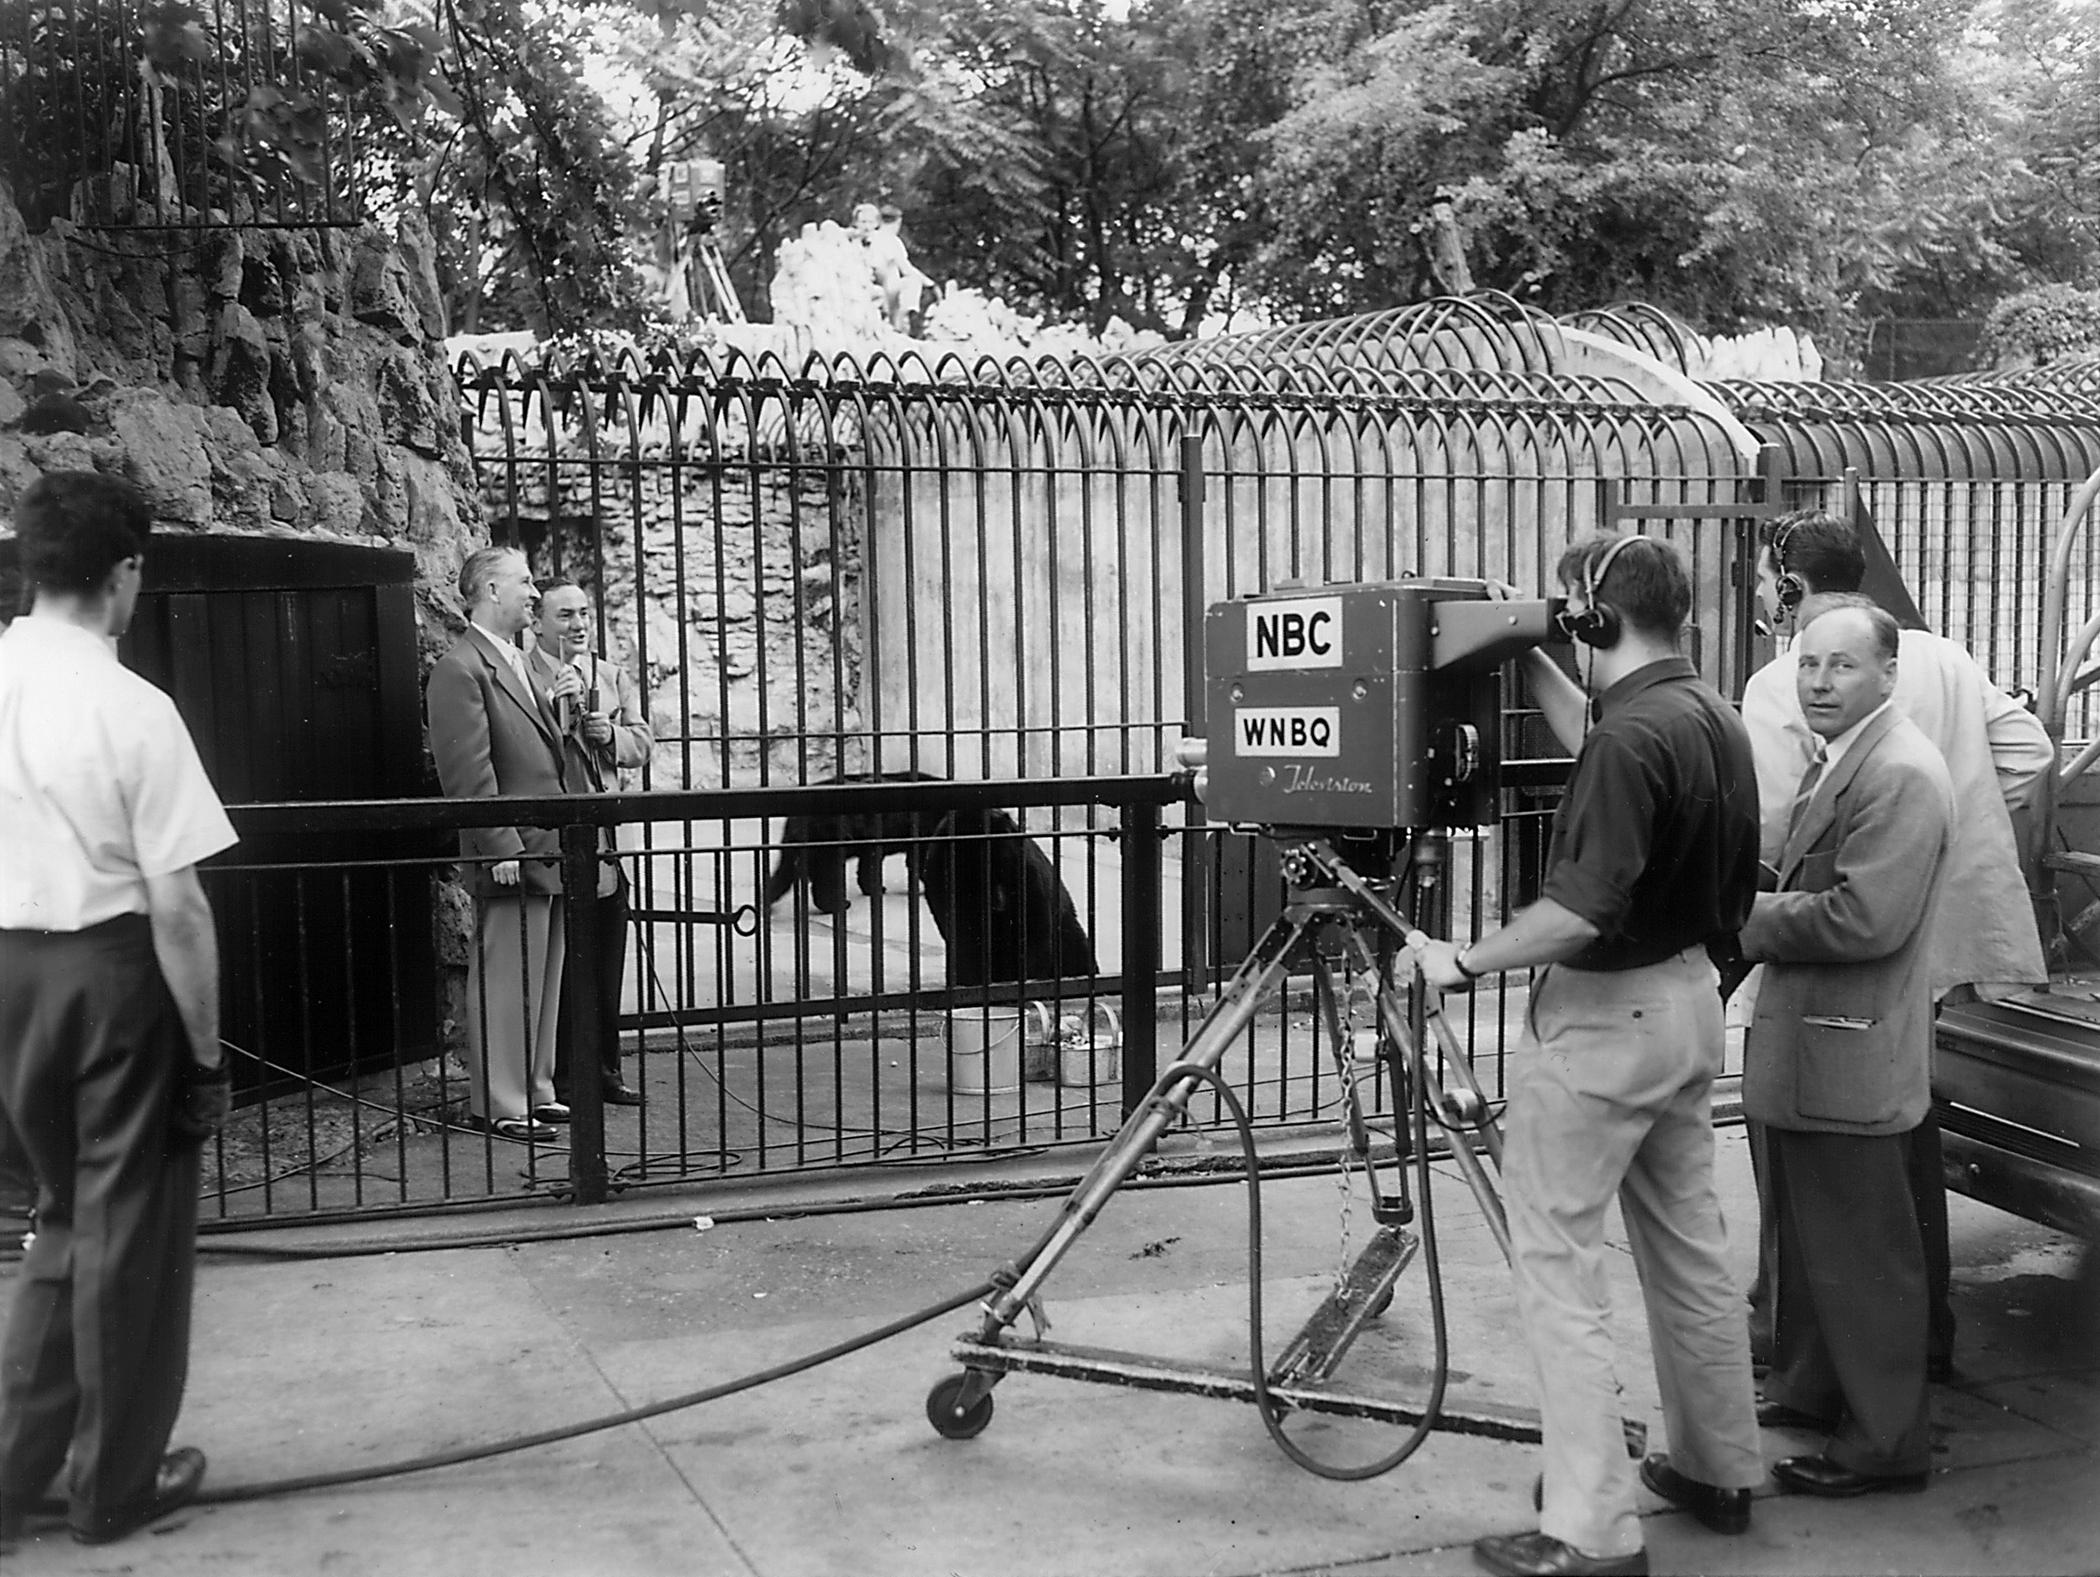 “Zoo Parade” filming in the 1950s: Lincoln Park Zoo Director Marlin Perkins brings wildlife into households with his TV program, “Zoo Parade,” headquartered at Lincoln Park Zoo. (Courtesy Chicago Park District and Chicago History Museum)